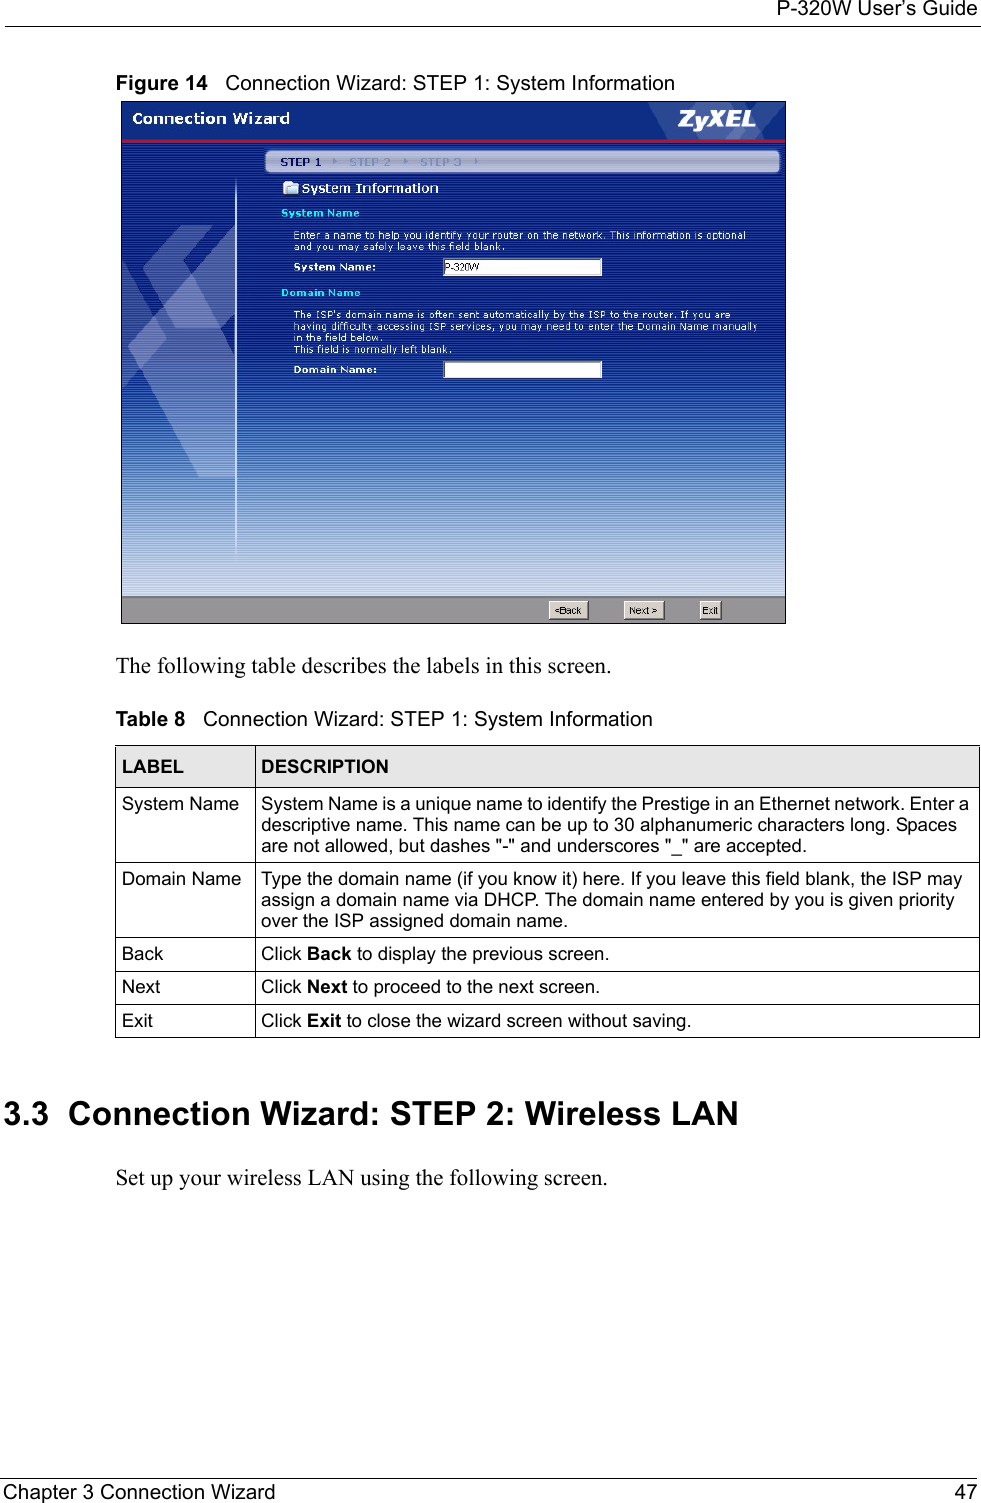 P-320W User’s GuideChapter 3 Connection Wizard 47Figure 14   Connection Wizard: STEP 1: System InformationThe following table describes the labels in this screen.Table 8   Connection Wizard: STEP 1: System InformationLABEL DESCRIPTIONSystem Name System Name is a unique name to identify the Prestige in an Ethernet network. Enter a descriptive name. This name can be up to 30 alphanumeric characters long. Spaces are not allowed, but dashes &quot;-&quot; and underscores &quot;_&quot; are accepted. Domain Name Type the domain name (if you know it) here. If you leave this field blank, the ISP may assign a domain name via DHCP. The domain name entered by you is given priority over the ISP assigned domain name.Back Click Back to display the previous screen.Next Click Next to proceed to the next screen. Exit Click Exit to close the wizard screen without saving.3.3  Connection Wizard: STEP 2: Wireless LANSet up your wireless LAN using the following screen.